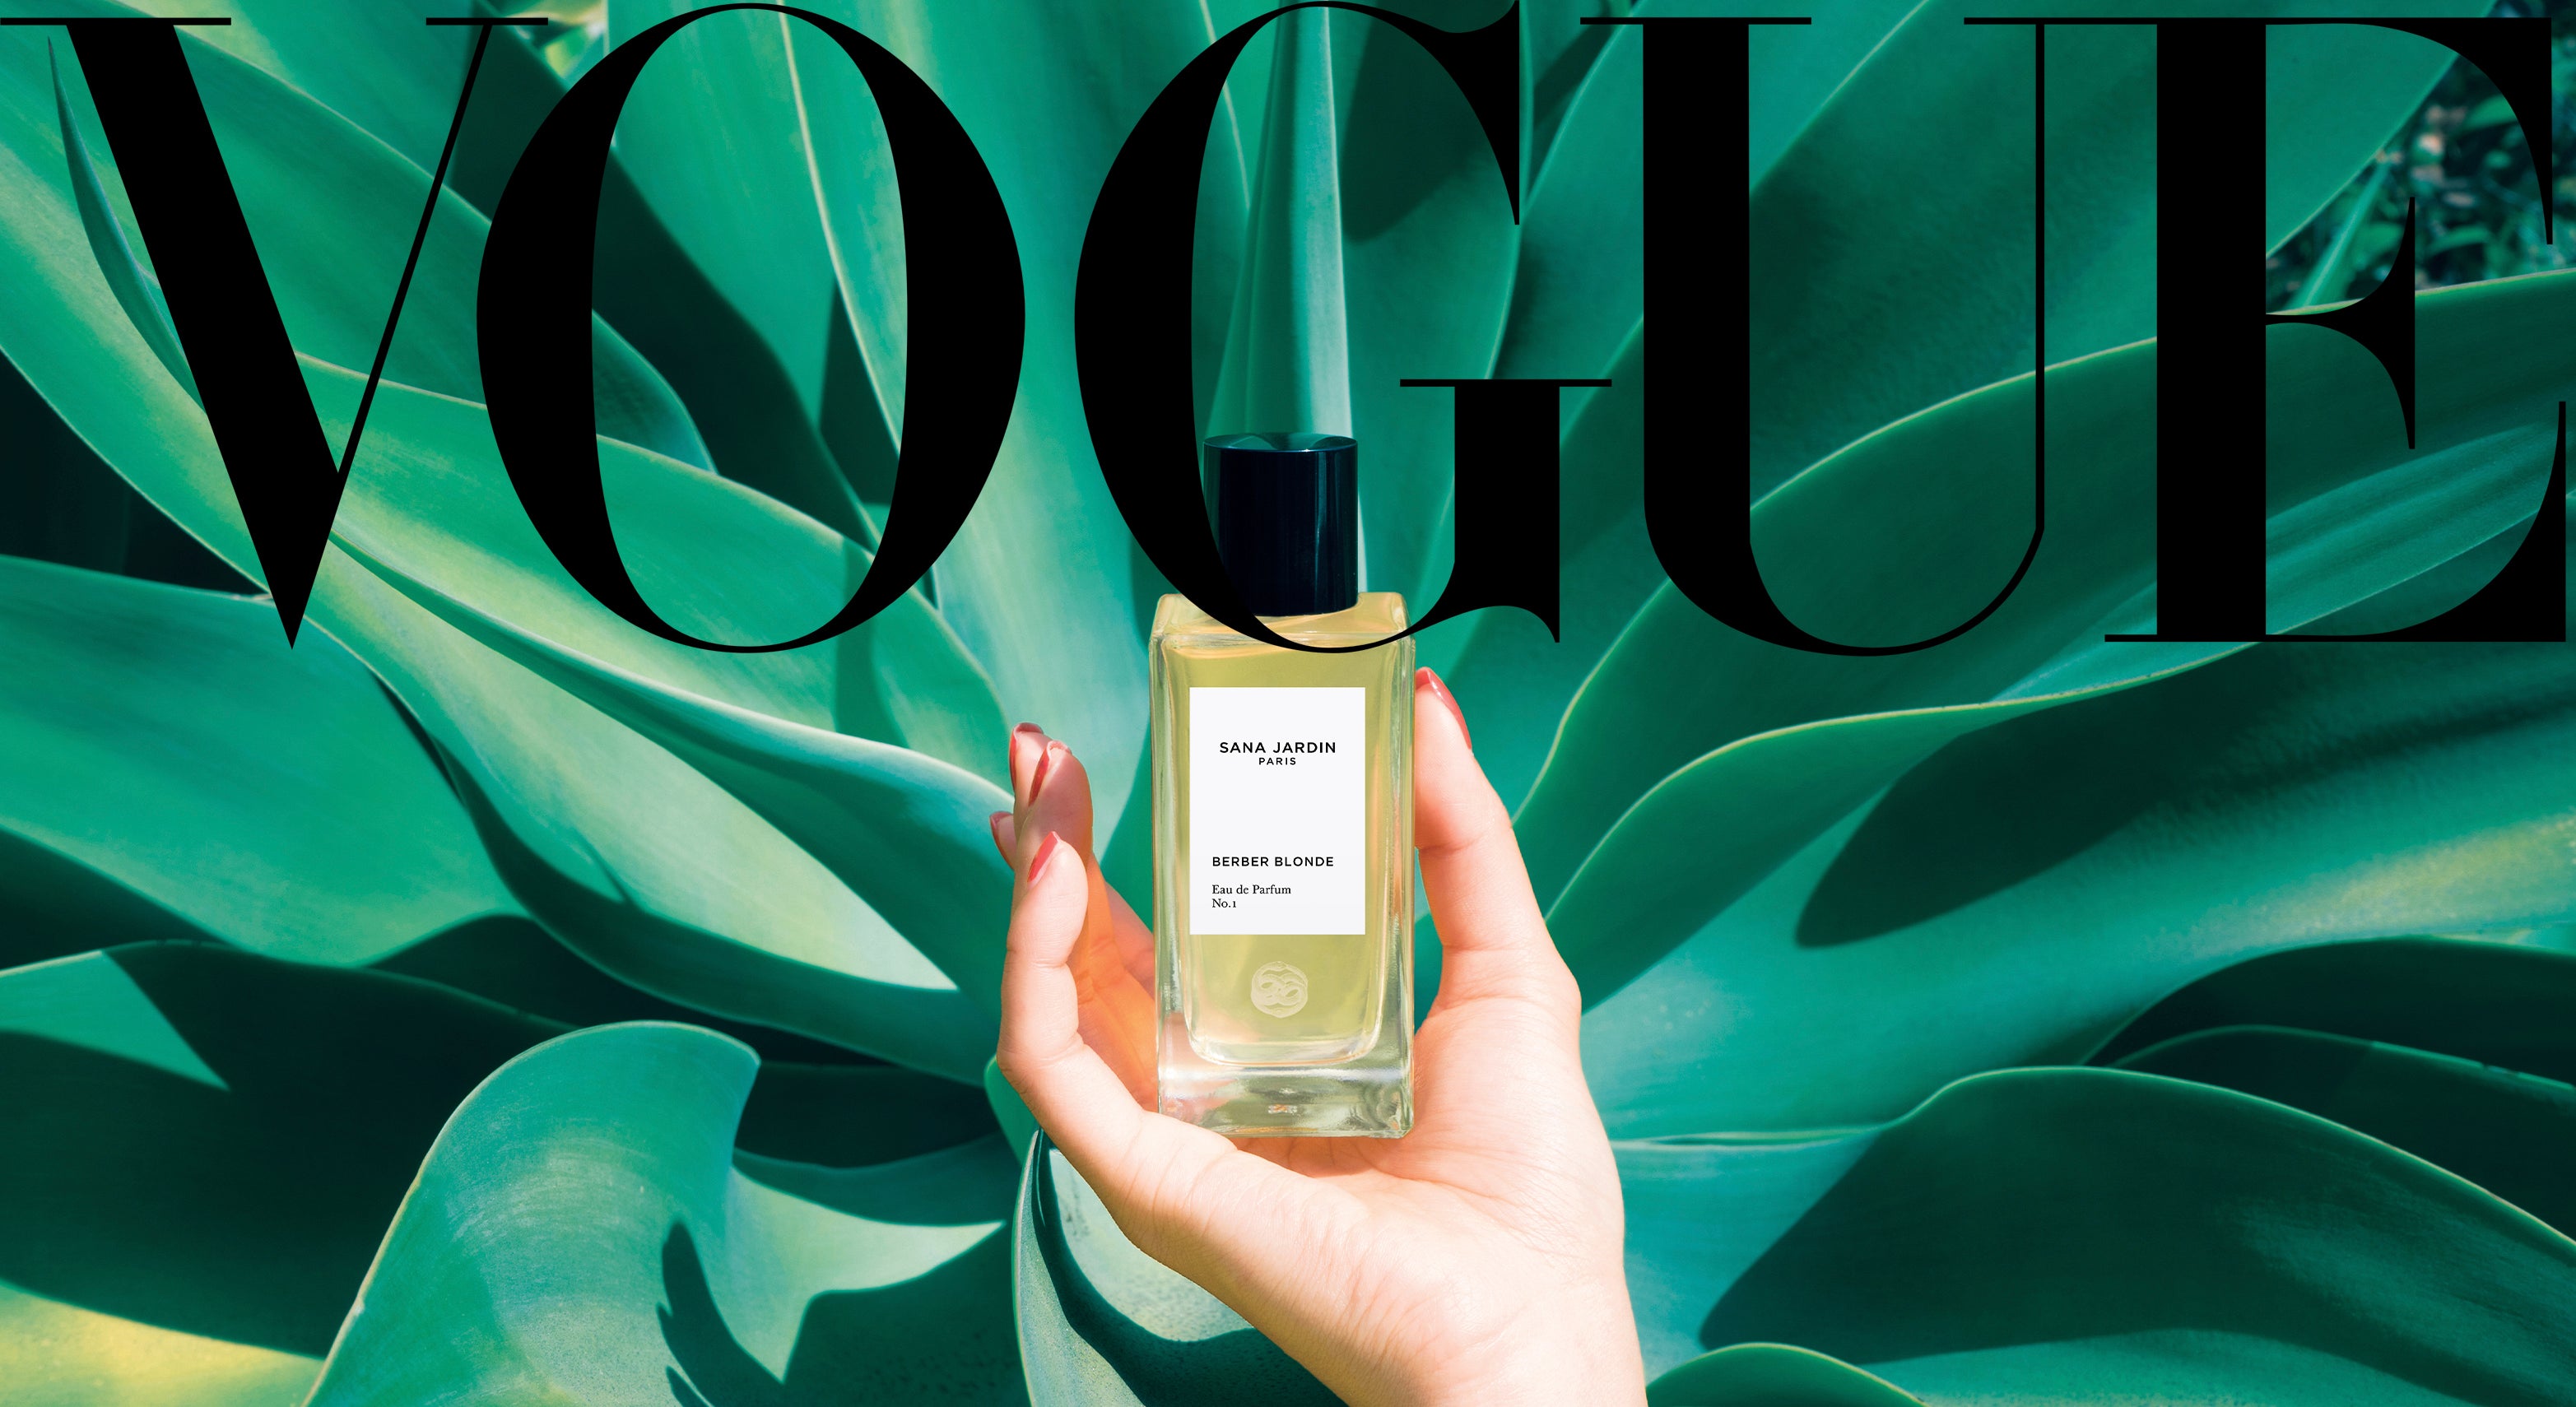 Vogue Arabia: This Perfume Brand is Changing the Fragrance Industry for the Good